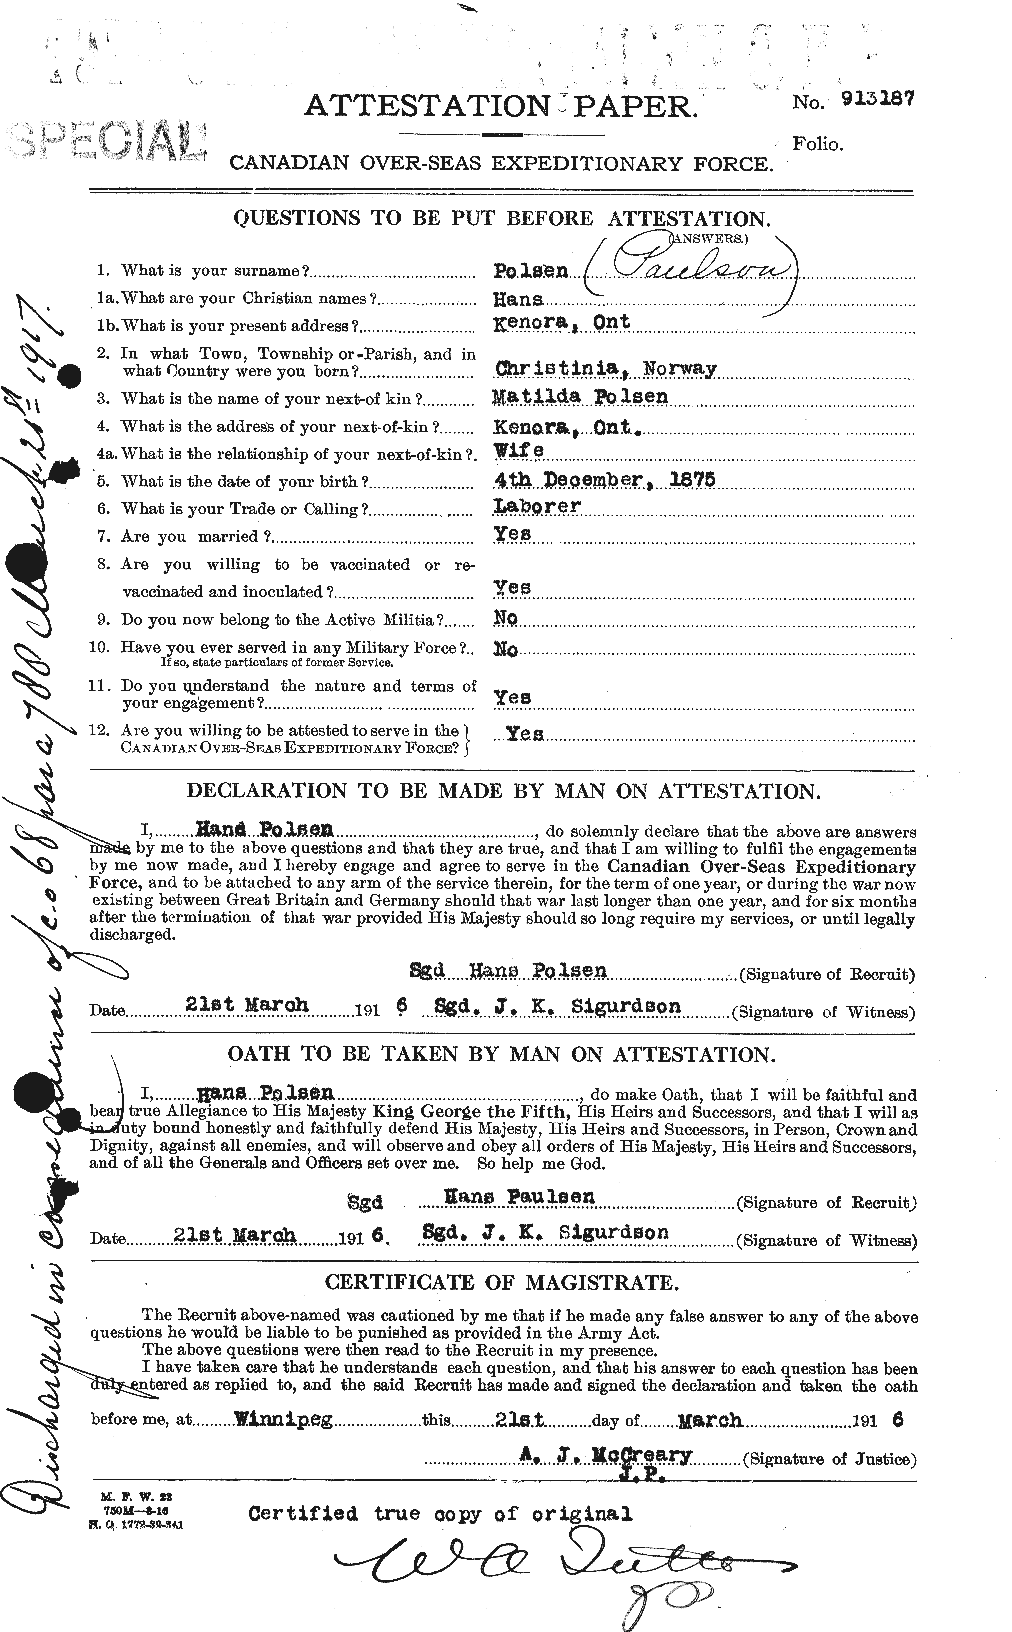 Personnel Records of the First World War - CEF 569522a